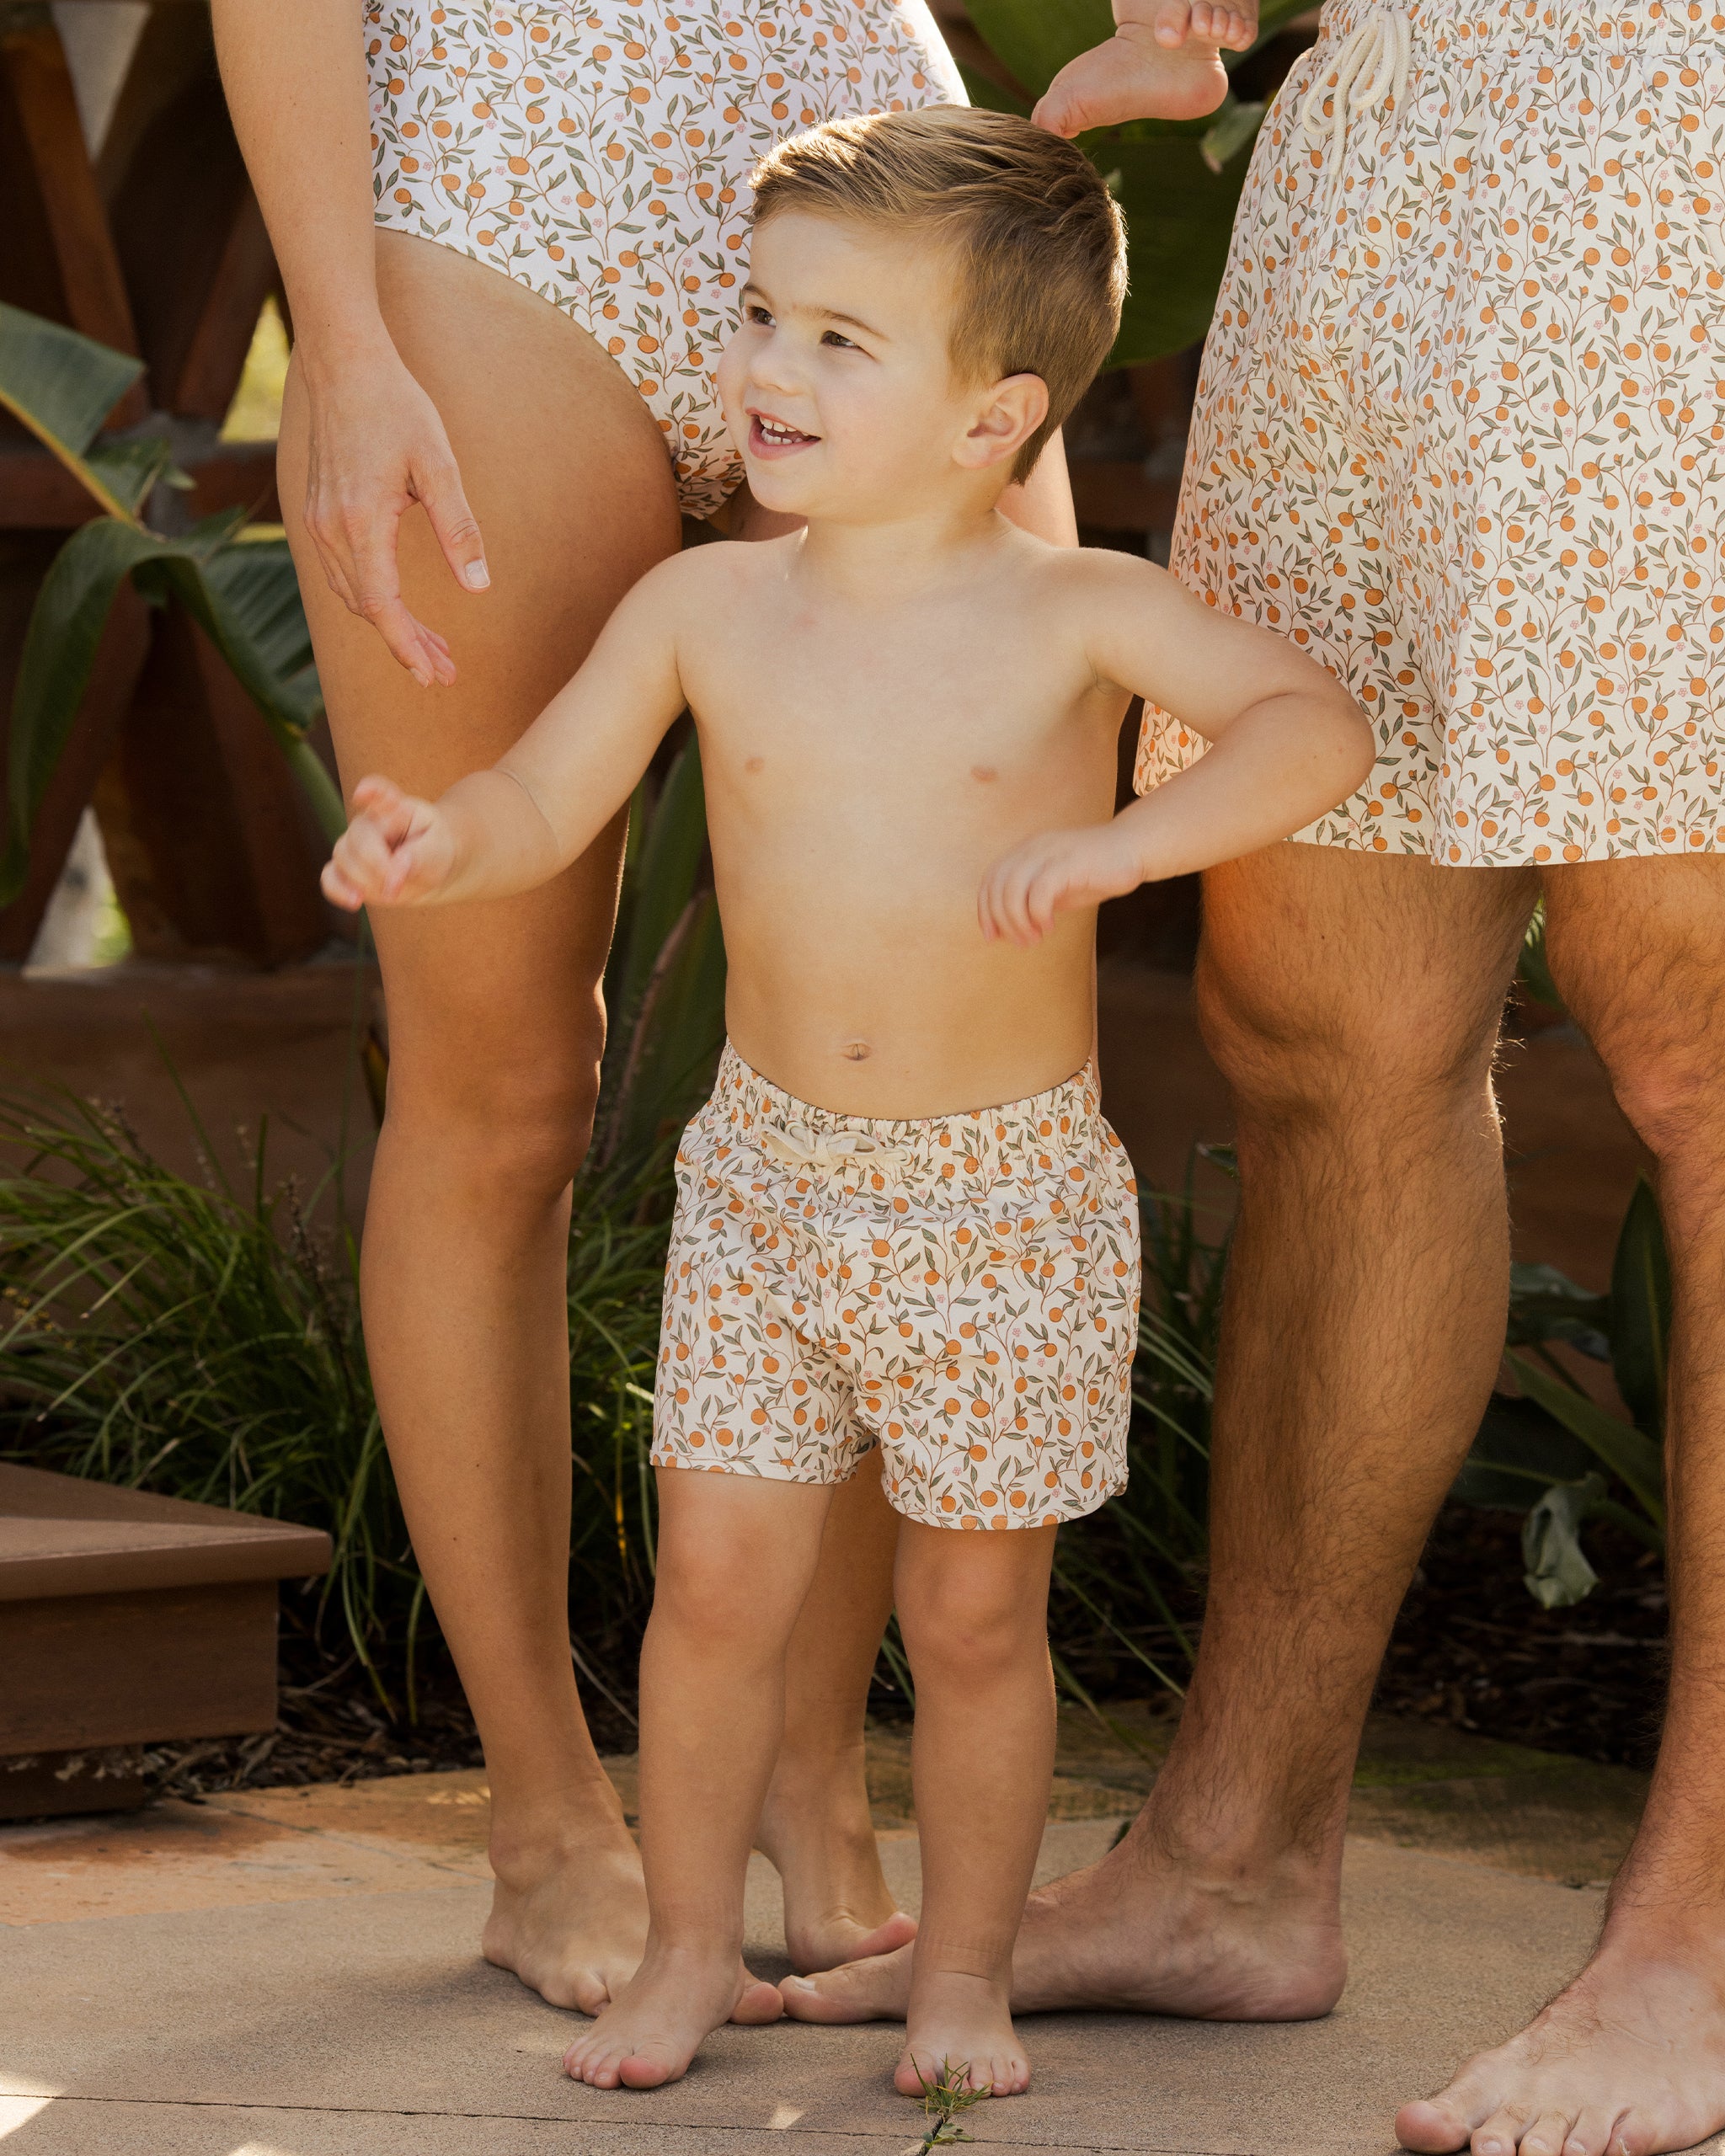 Swim Trunk || Citrus - Rylee + Cru | Kids Clothes | Trendy Baby Clothes | Modern Infant Outfits |